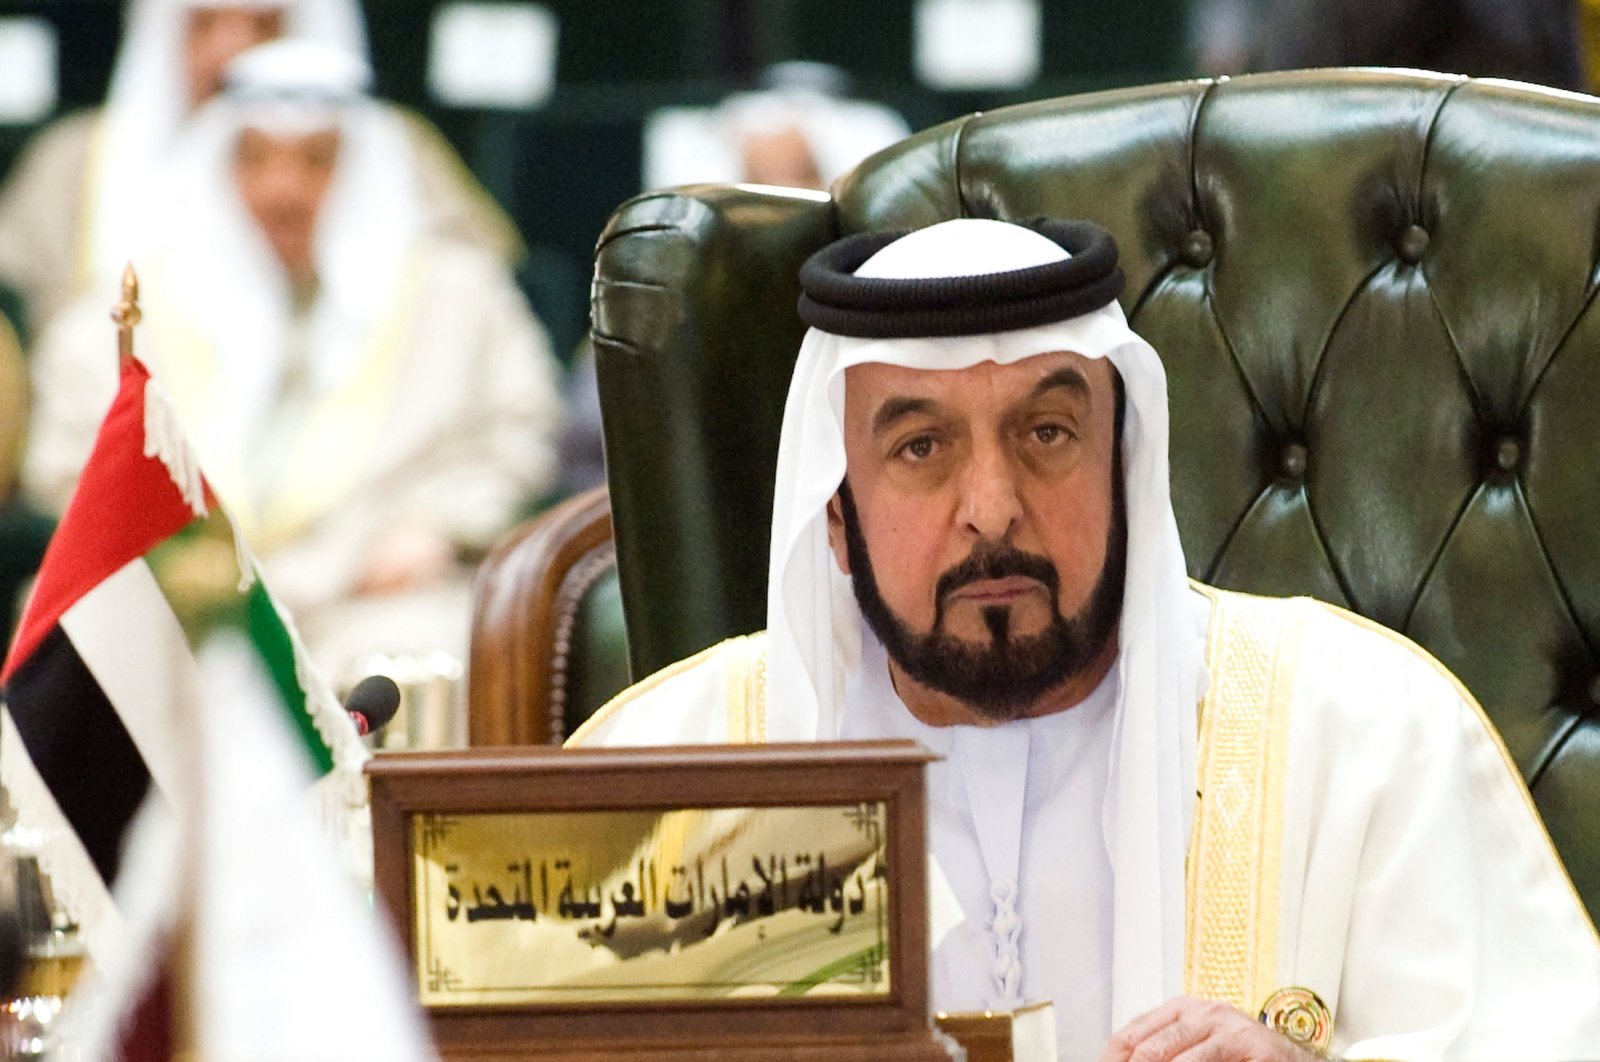 United Arab Emirates President Sheikh Khalifa bin Zayed Al Nahyan listens to closing remarks during the closing ceremony of the Gulf Cooperation Council summit in Kuwait&#039;s Bayan Palace, Dec. 15, 2009. (Reuters Photo)